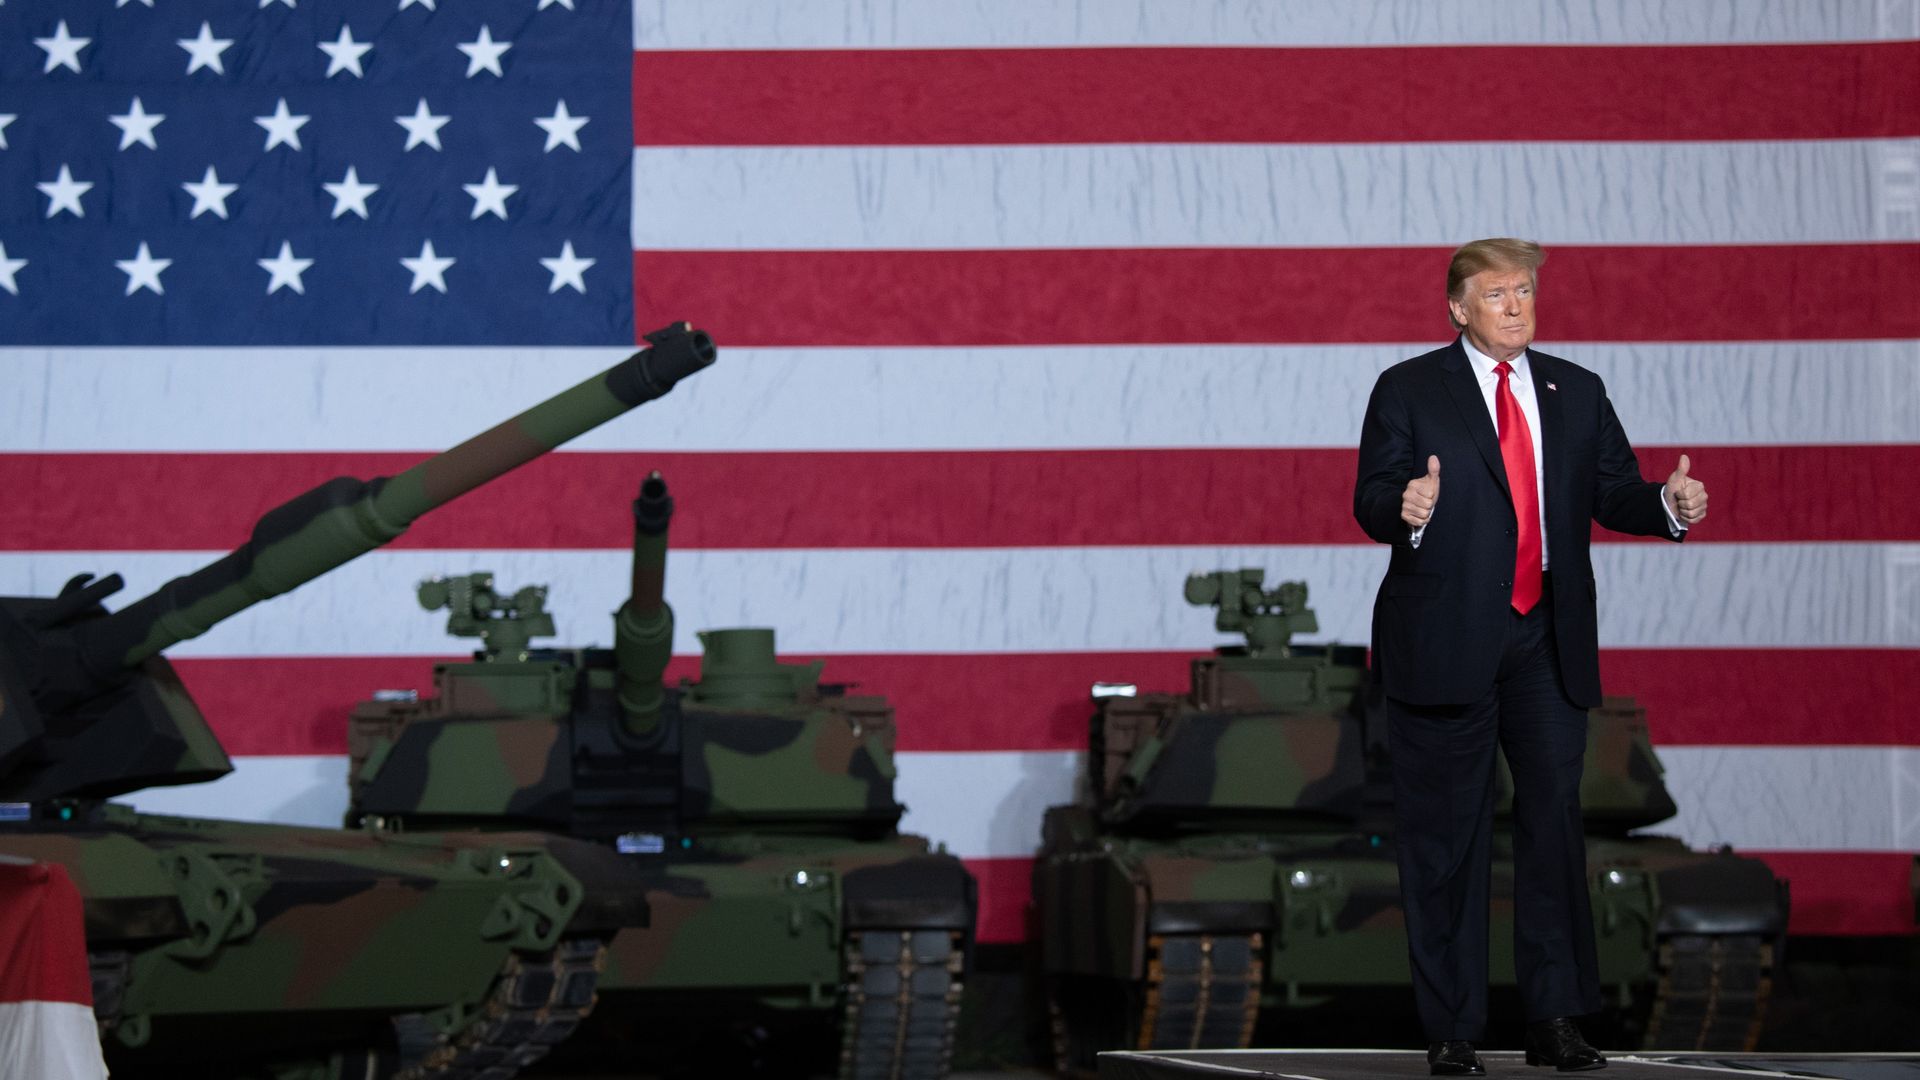  President Donald Trump arrives to speak after touring the Lima Army Tank Plant at Joint Systems Manufacturing in Lima, Ohio, March 20.